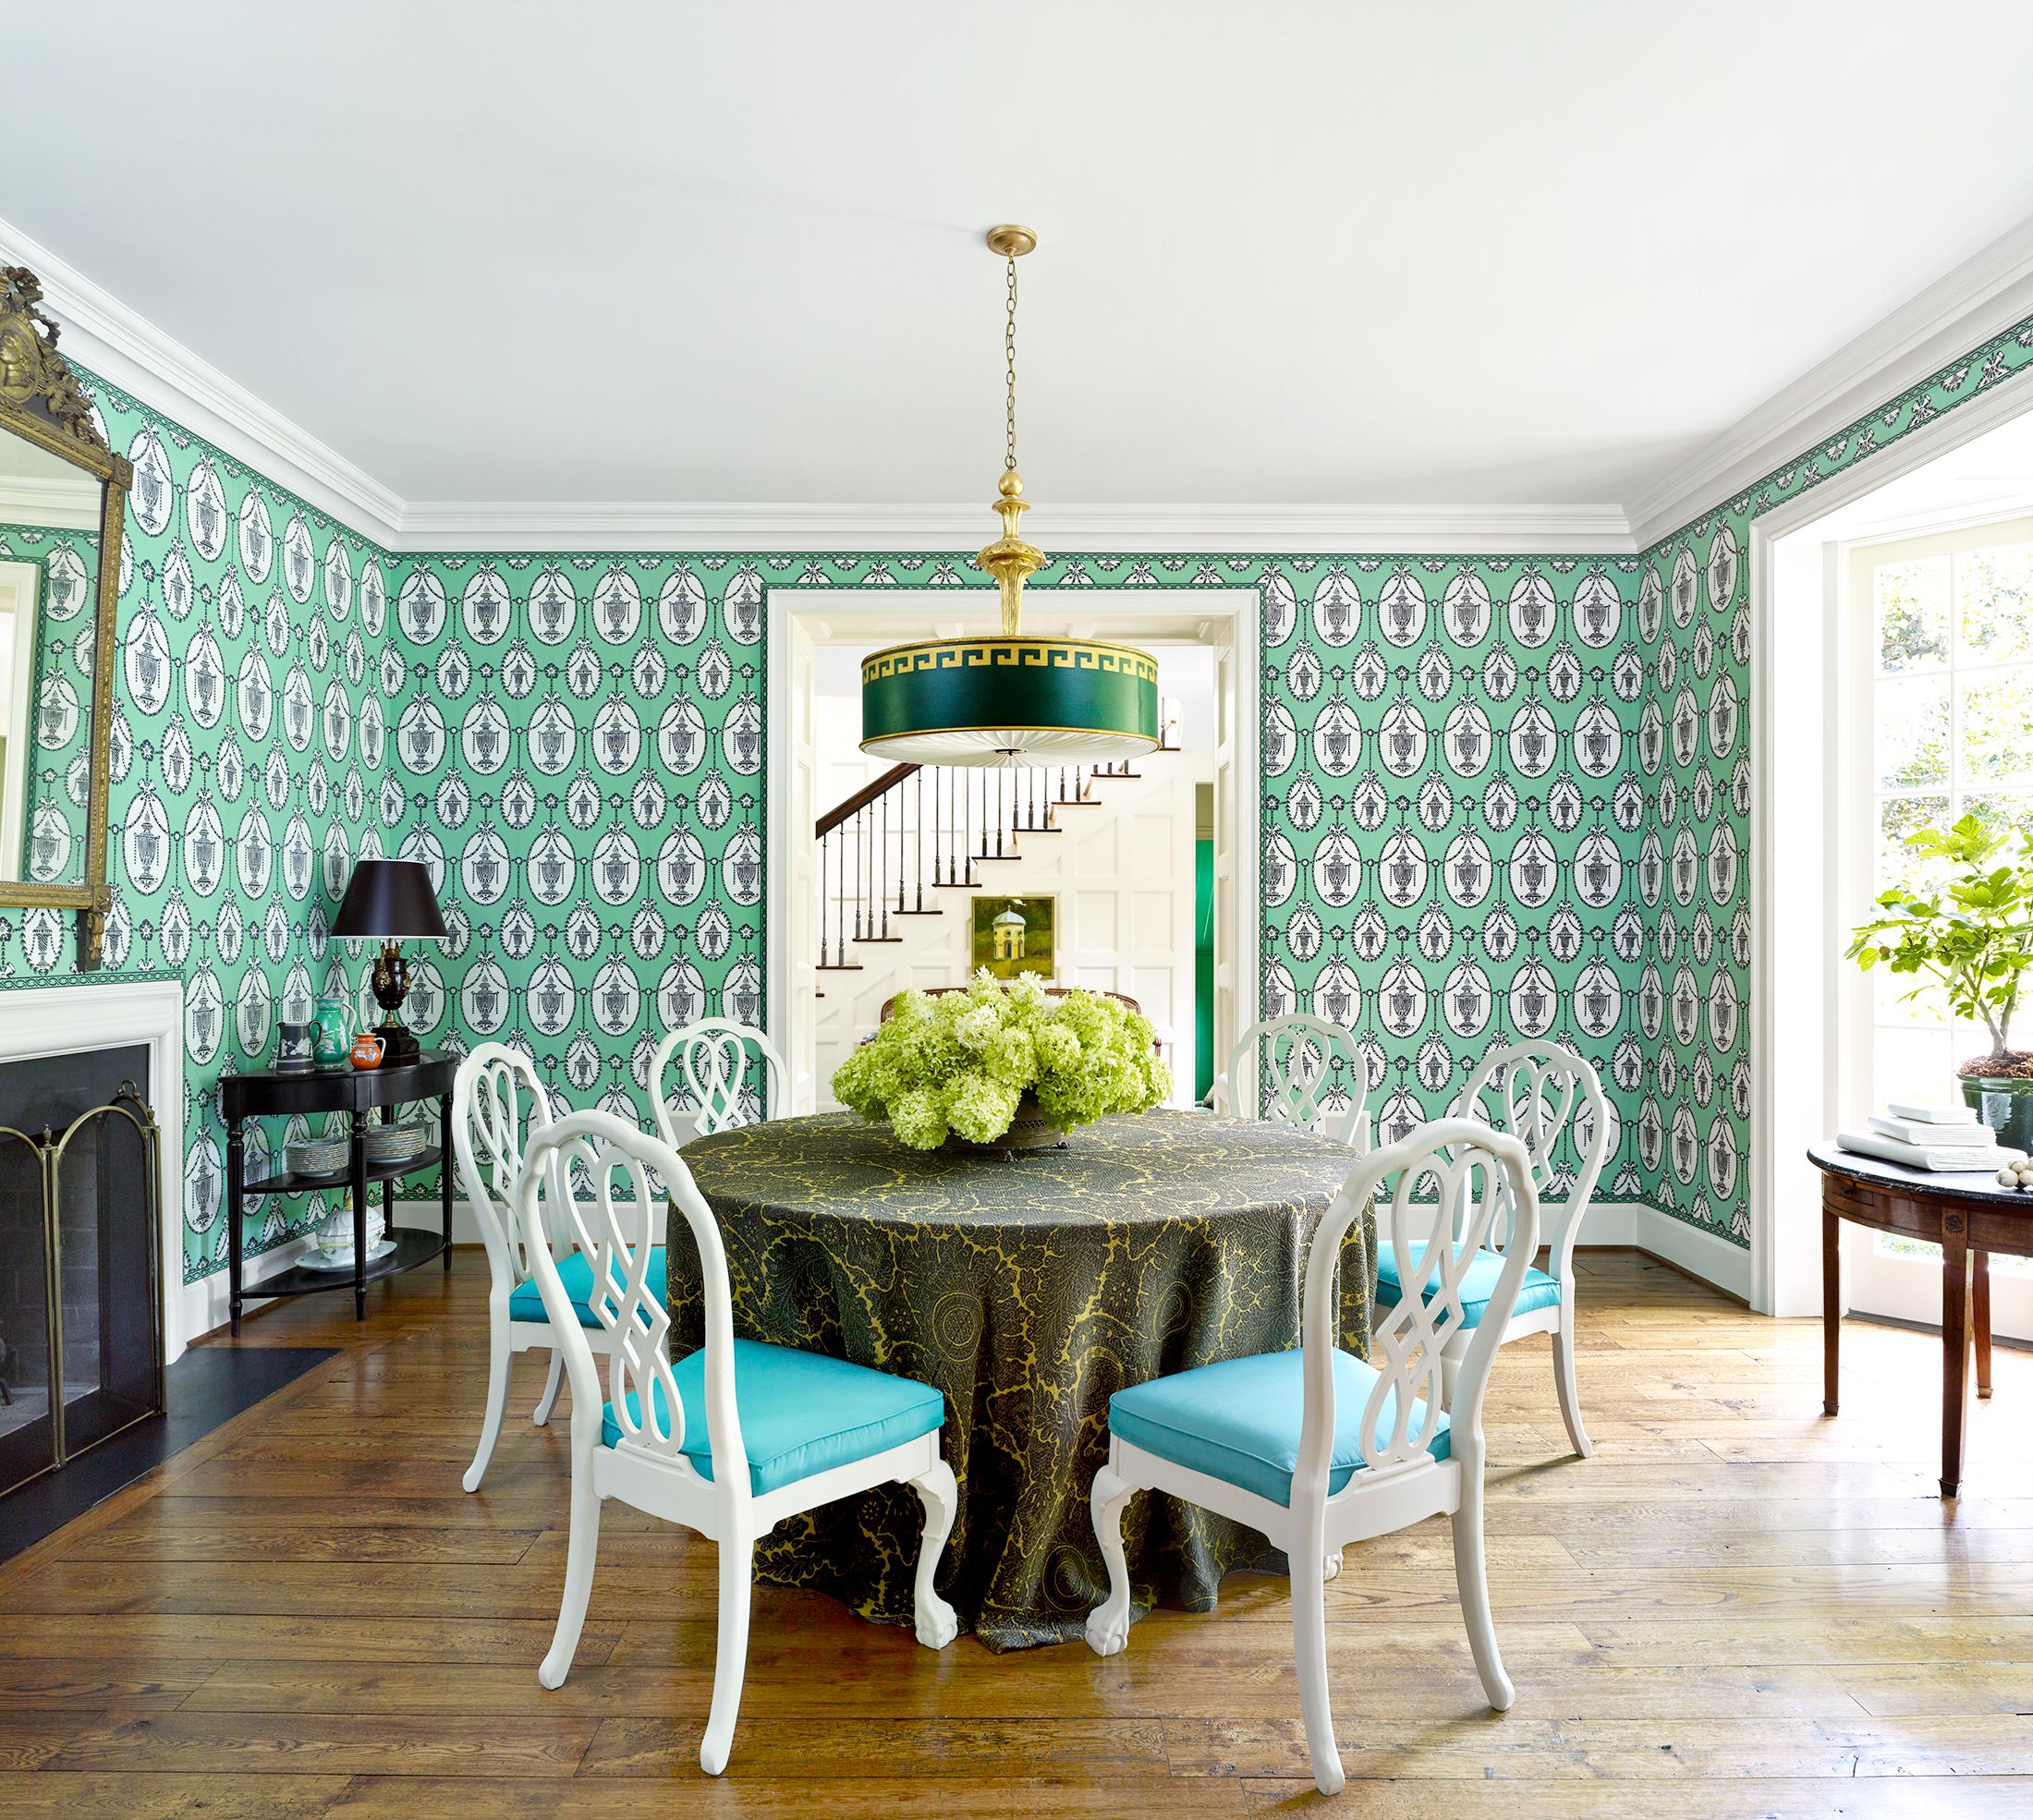 25 Colors That Go With Mint Green in Any Room